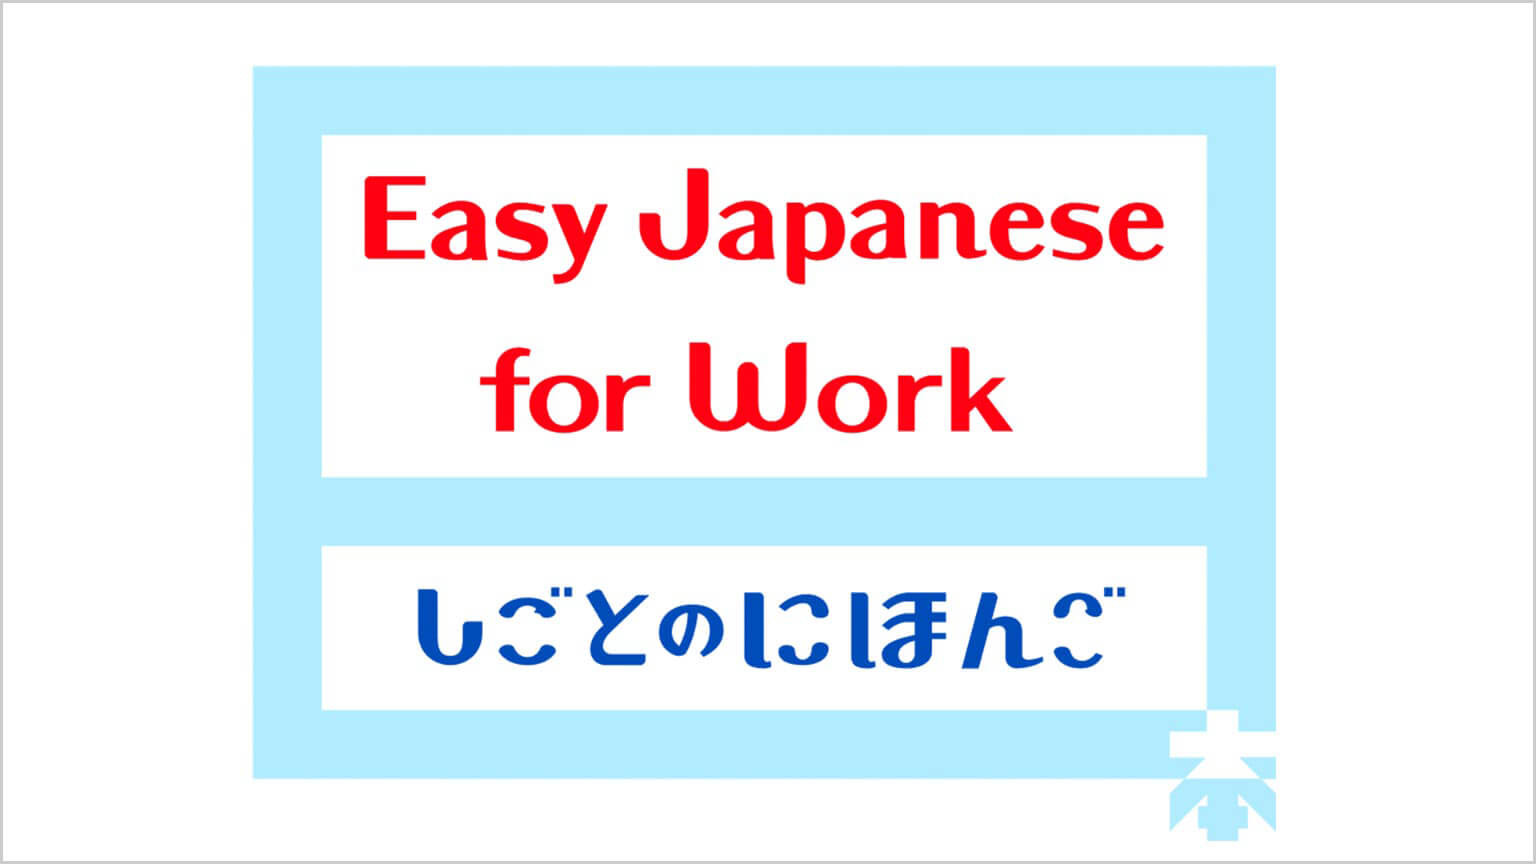 Tiếng Nhật trong công việc
Easy Japanese for Work